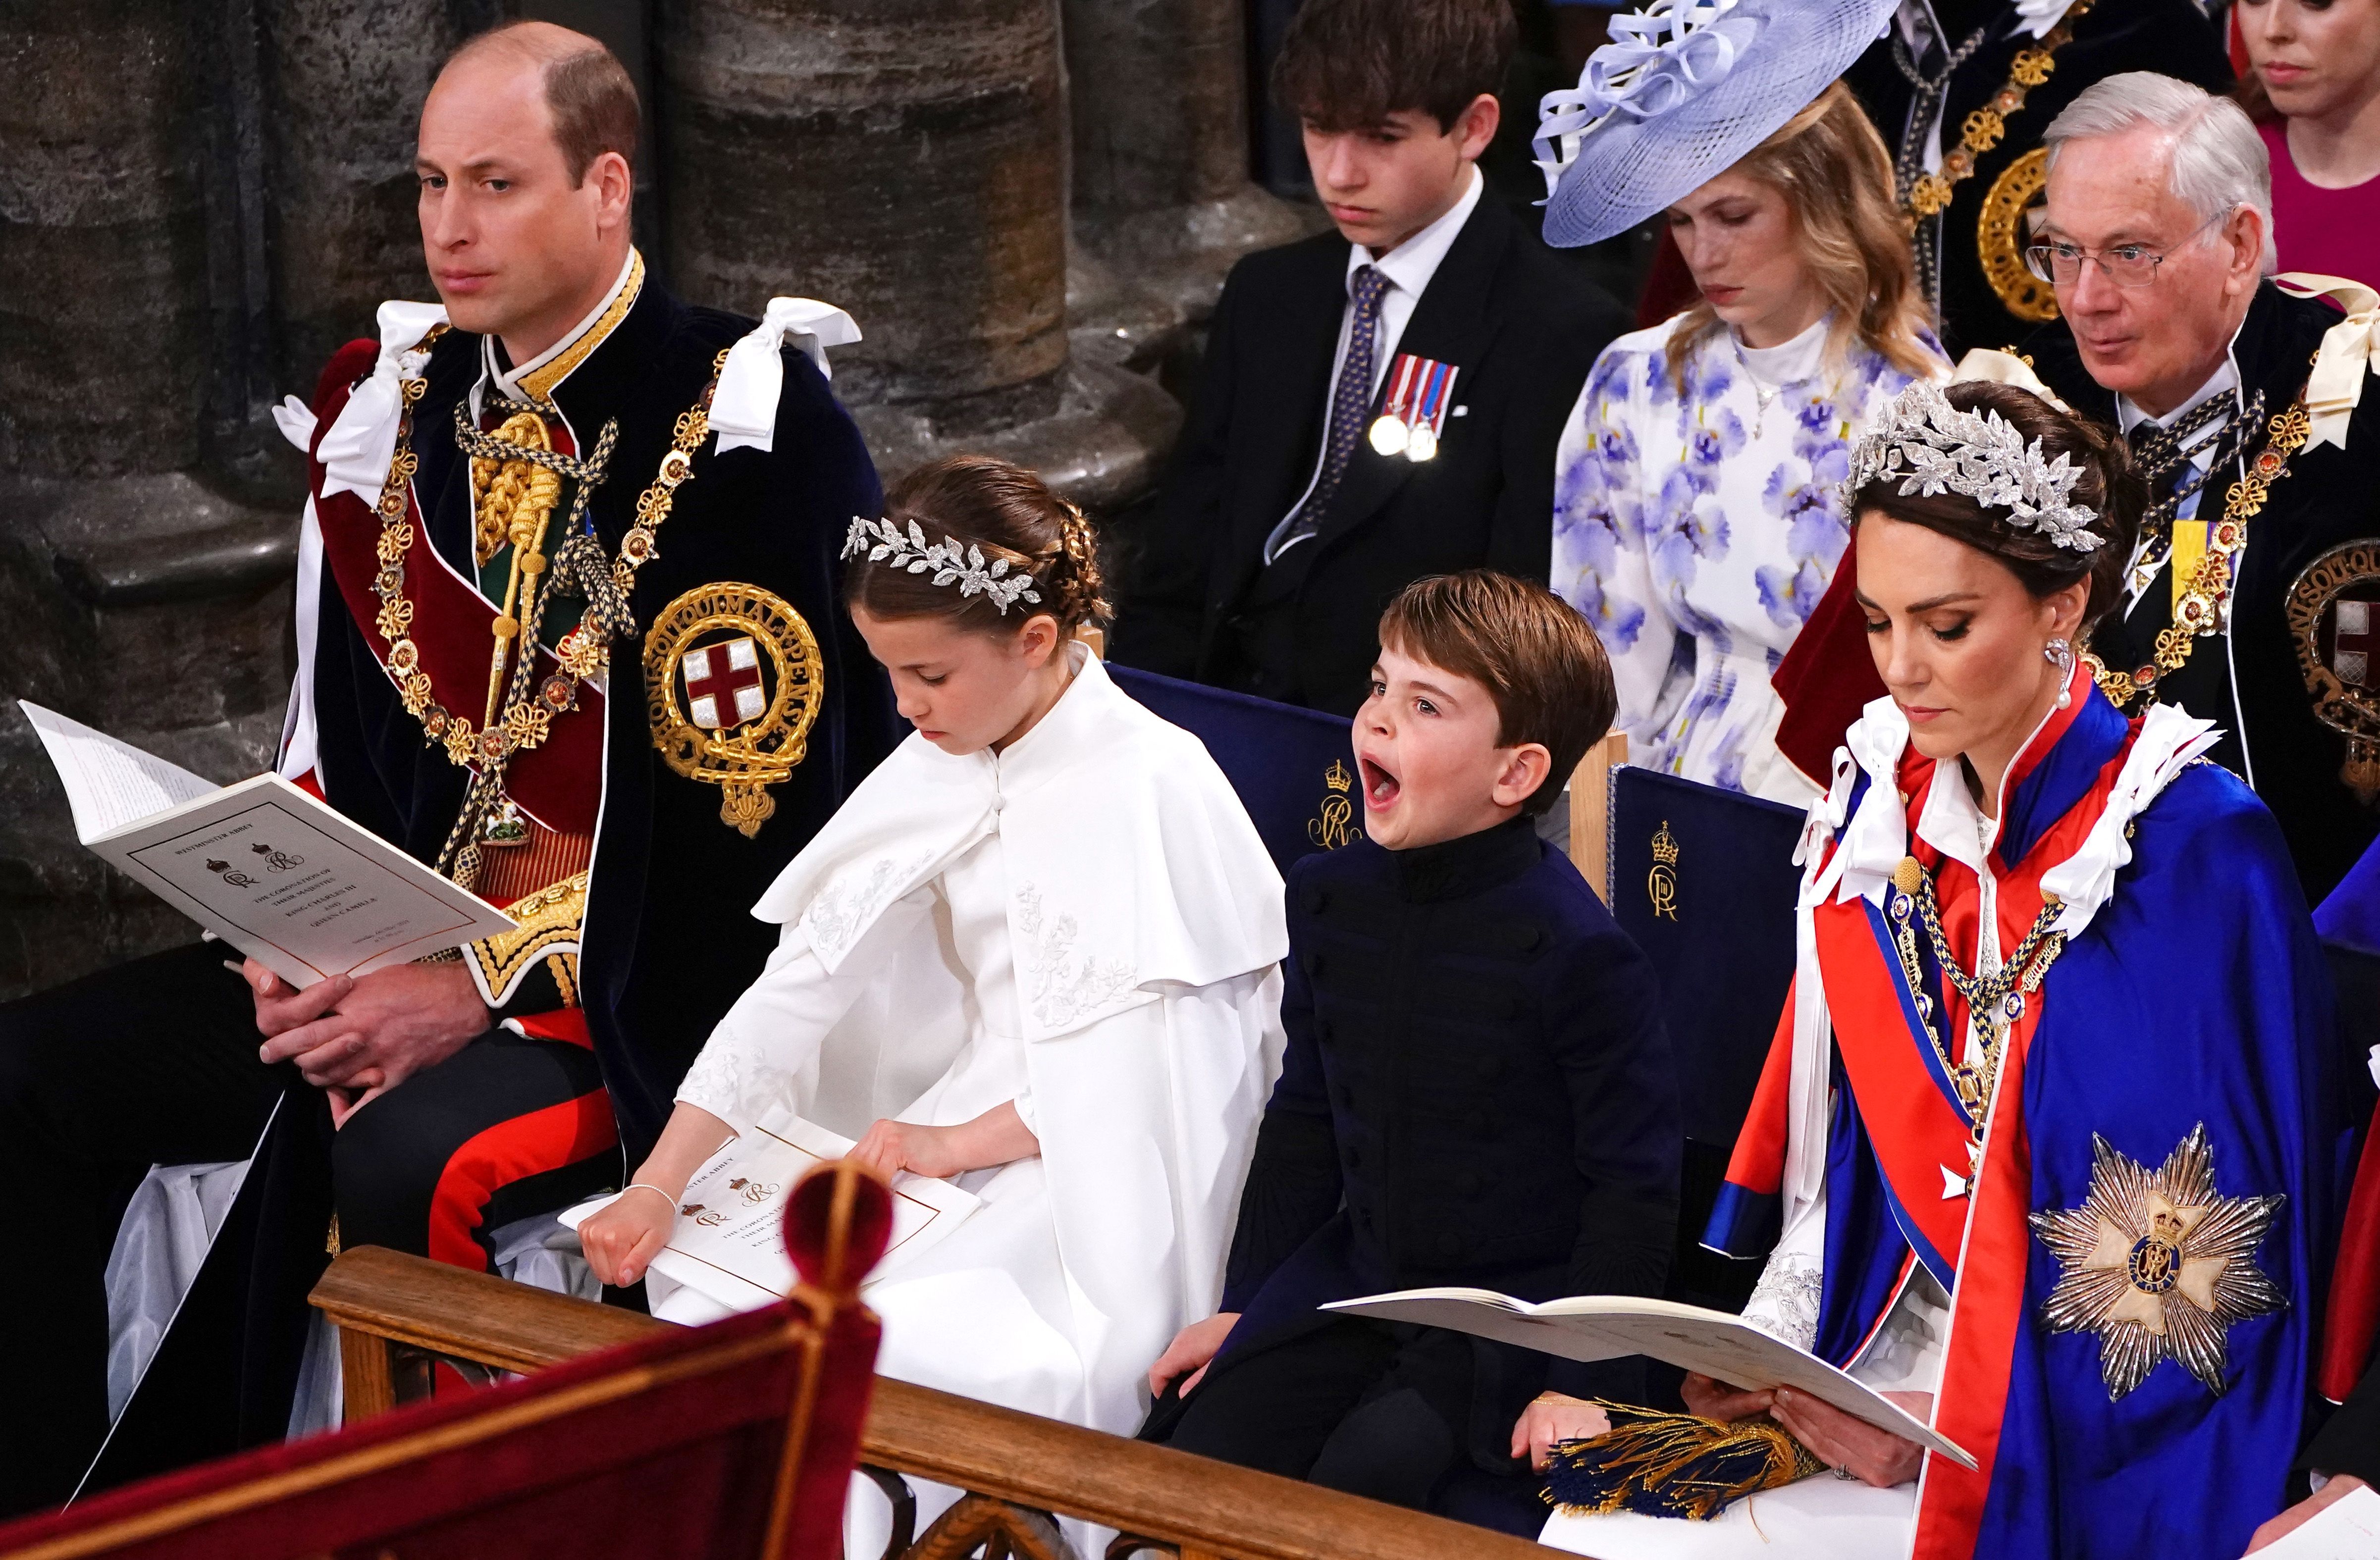 Updates: King Charles III crowned in lavish ceremony, News